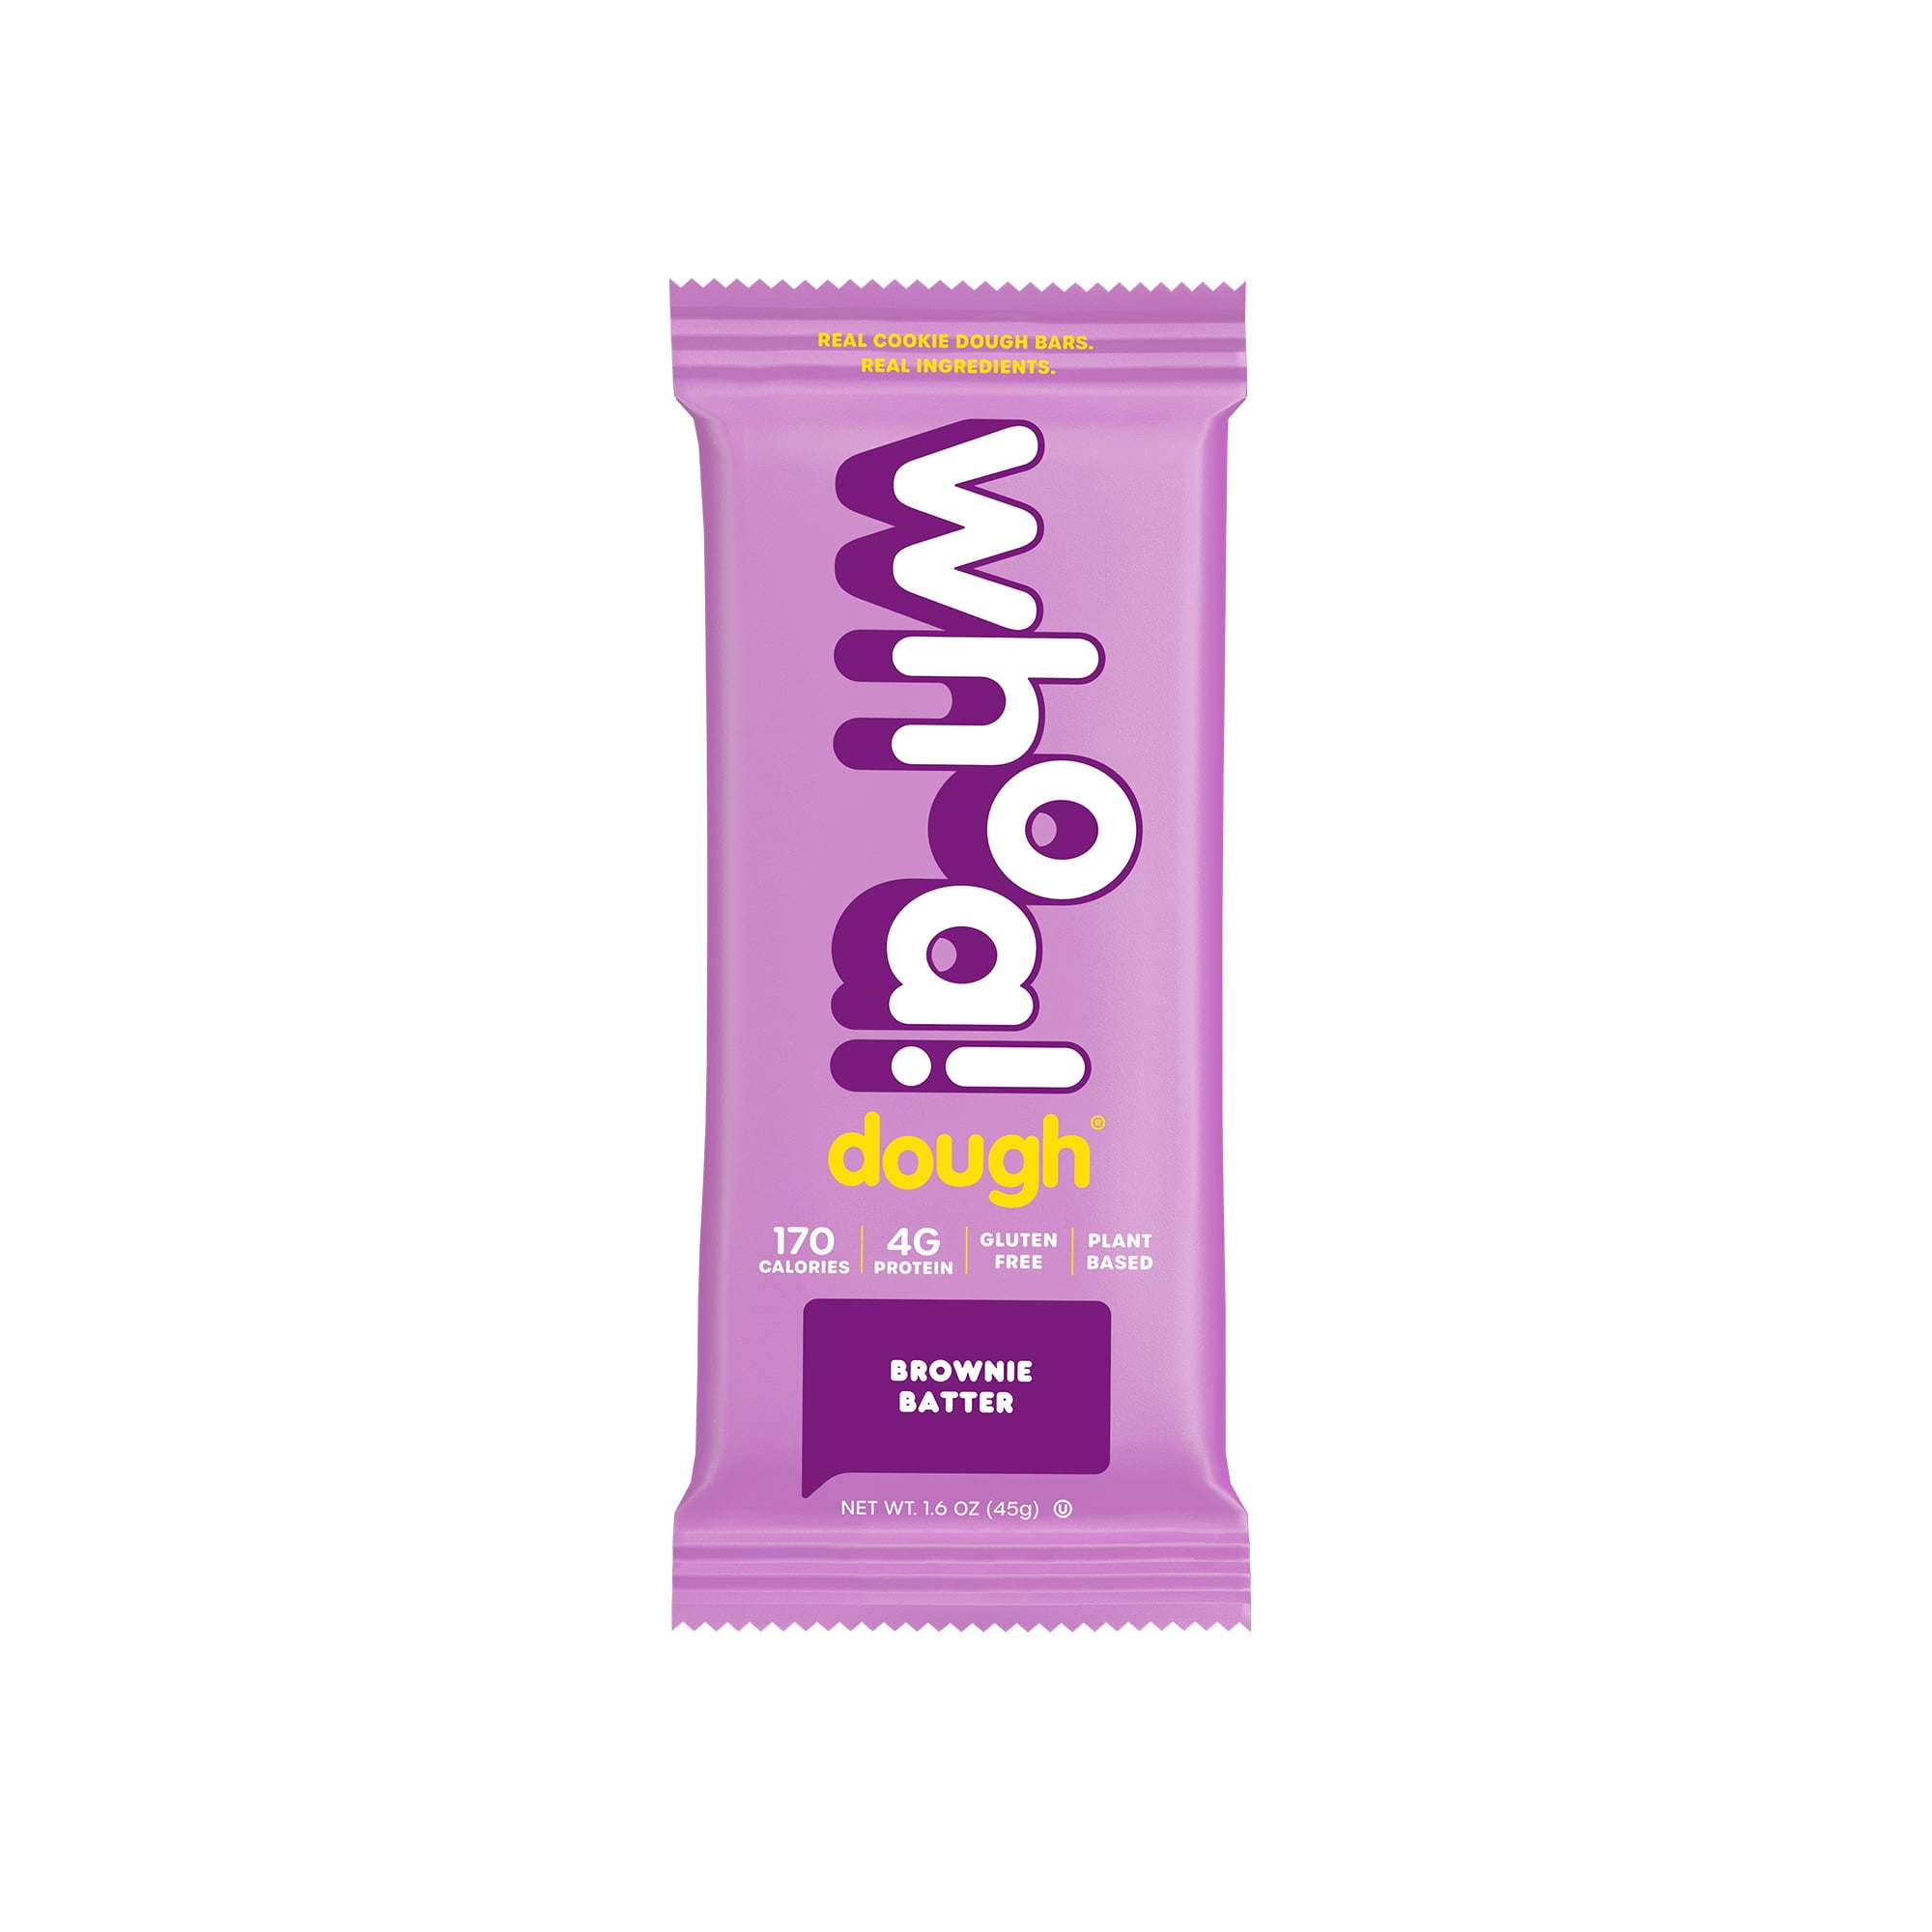  Whoa Dough Edible Cookie Dough Bars- Certified Non-GMO, Kosher  and Gluten Free Bars - Healthy Snack Foods - Plant Based Snacks Made With  Real Ingredients - Brownie Batter Cookie Dough 